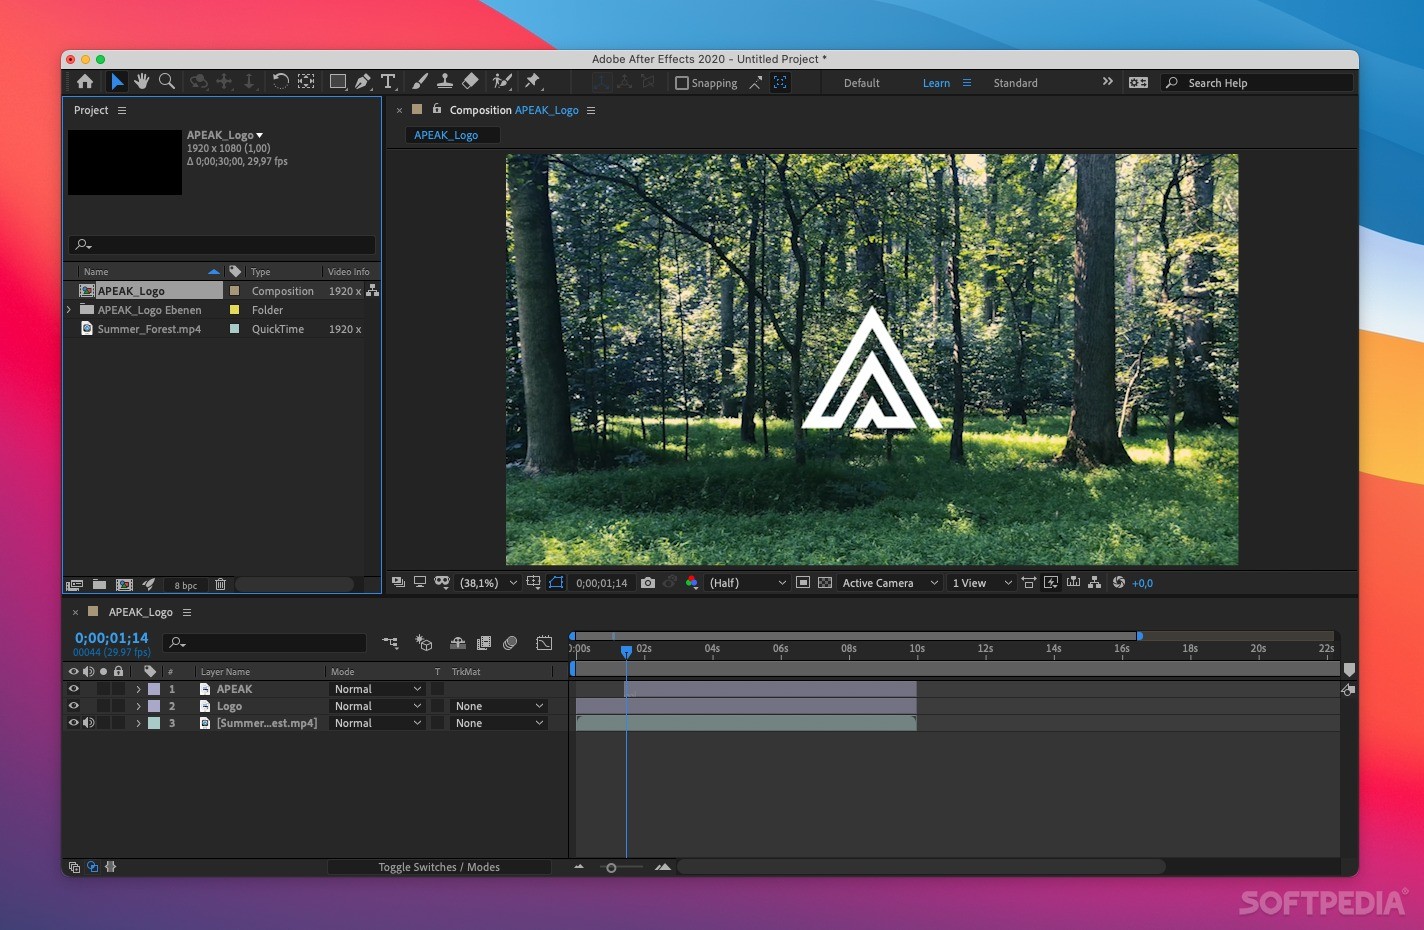 adobe after effects cc 2015 free download mac